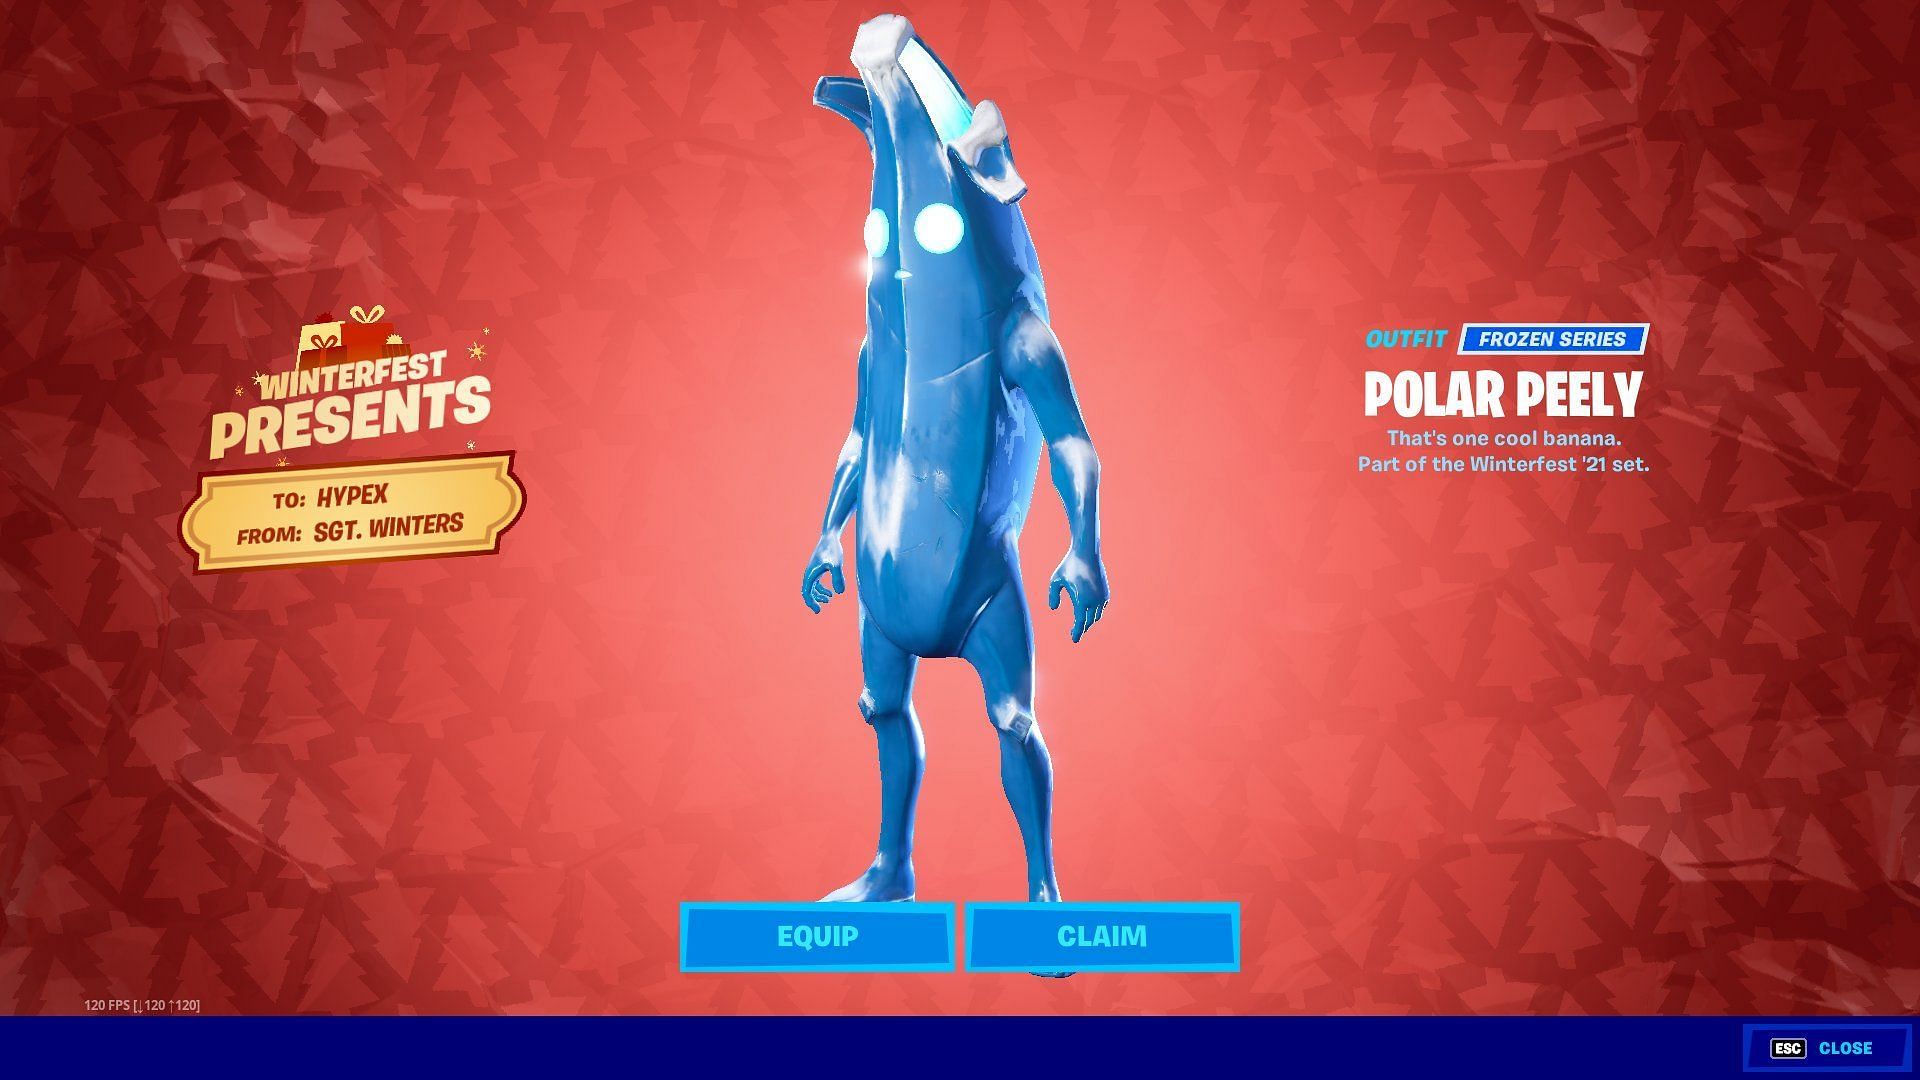 Here&#039;s how Fortnite players can get the Frozen Peely Winterfest Present (Image via Twitter/HYPEX)